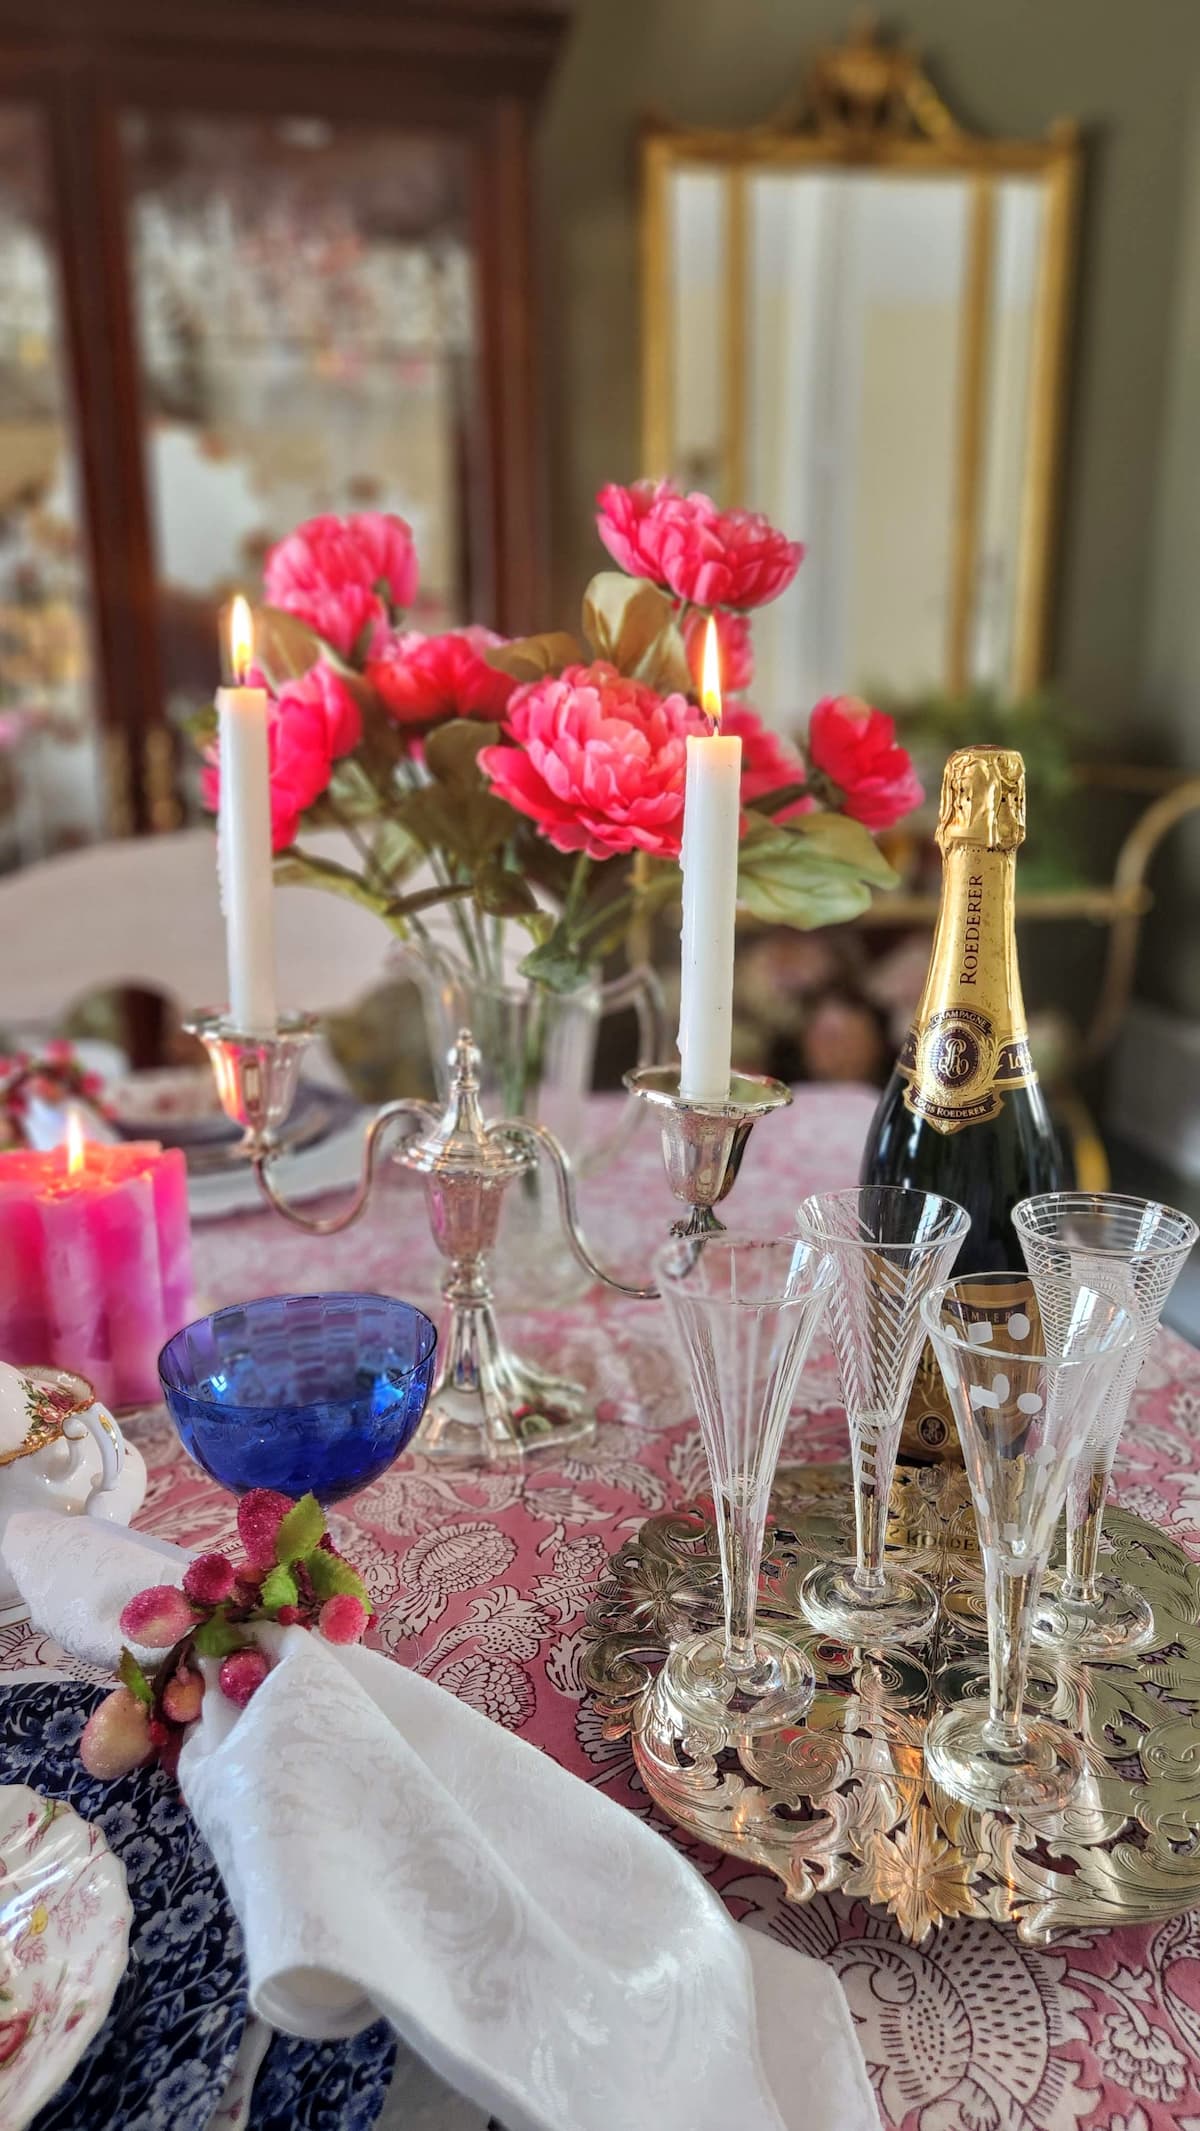 Spring Table Decor Using Pink and Blue